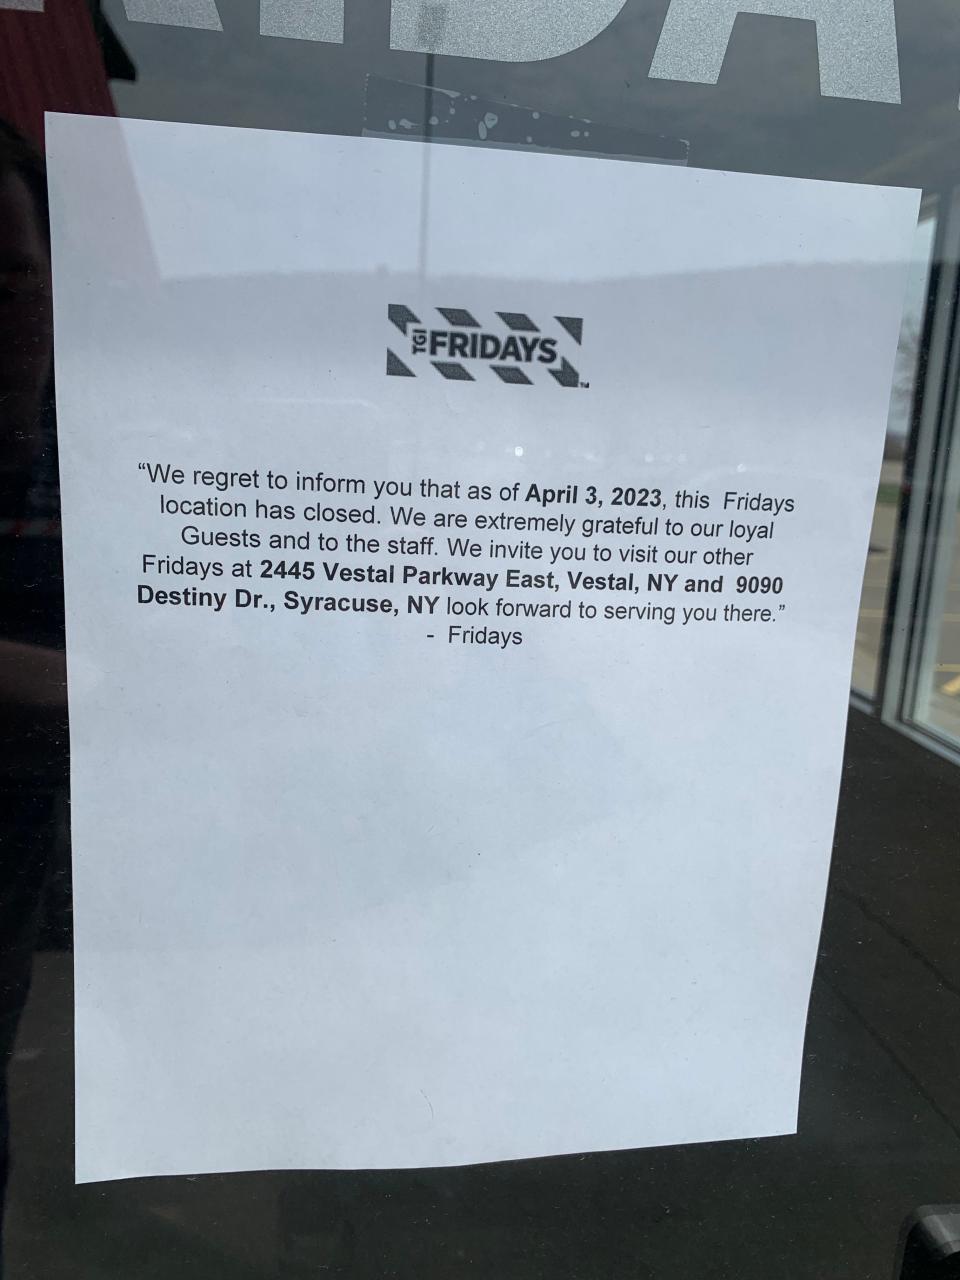 A note on the door of the TGI Fridays location at 830 County Road 64, Elmira